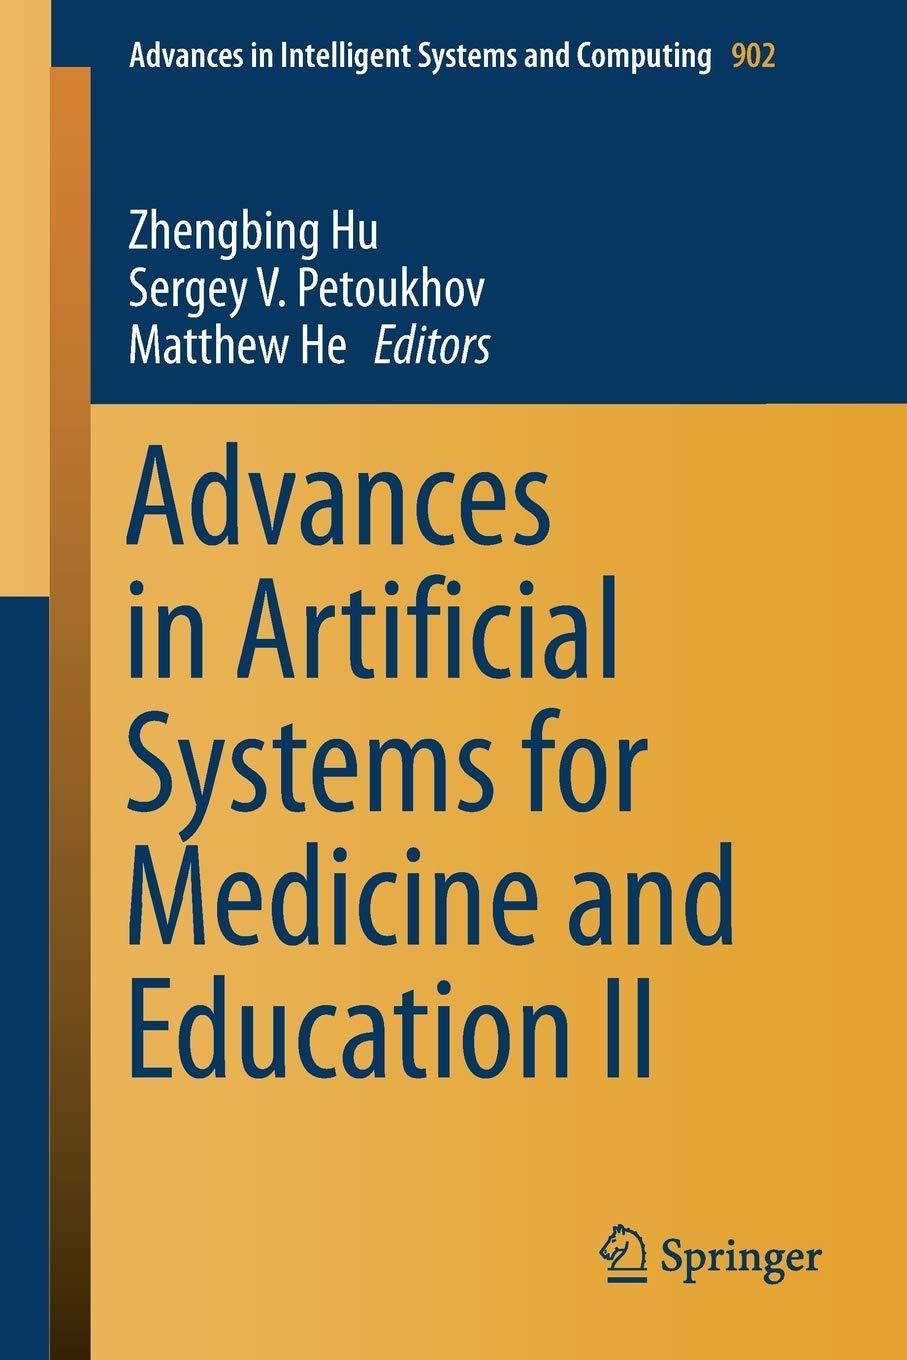 advances in artificial systems for medicine and education ii 1st edition zhengbing hu , sergey v. petoukhov ,